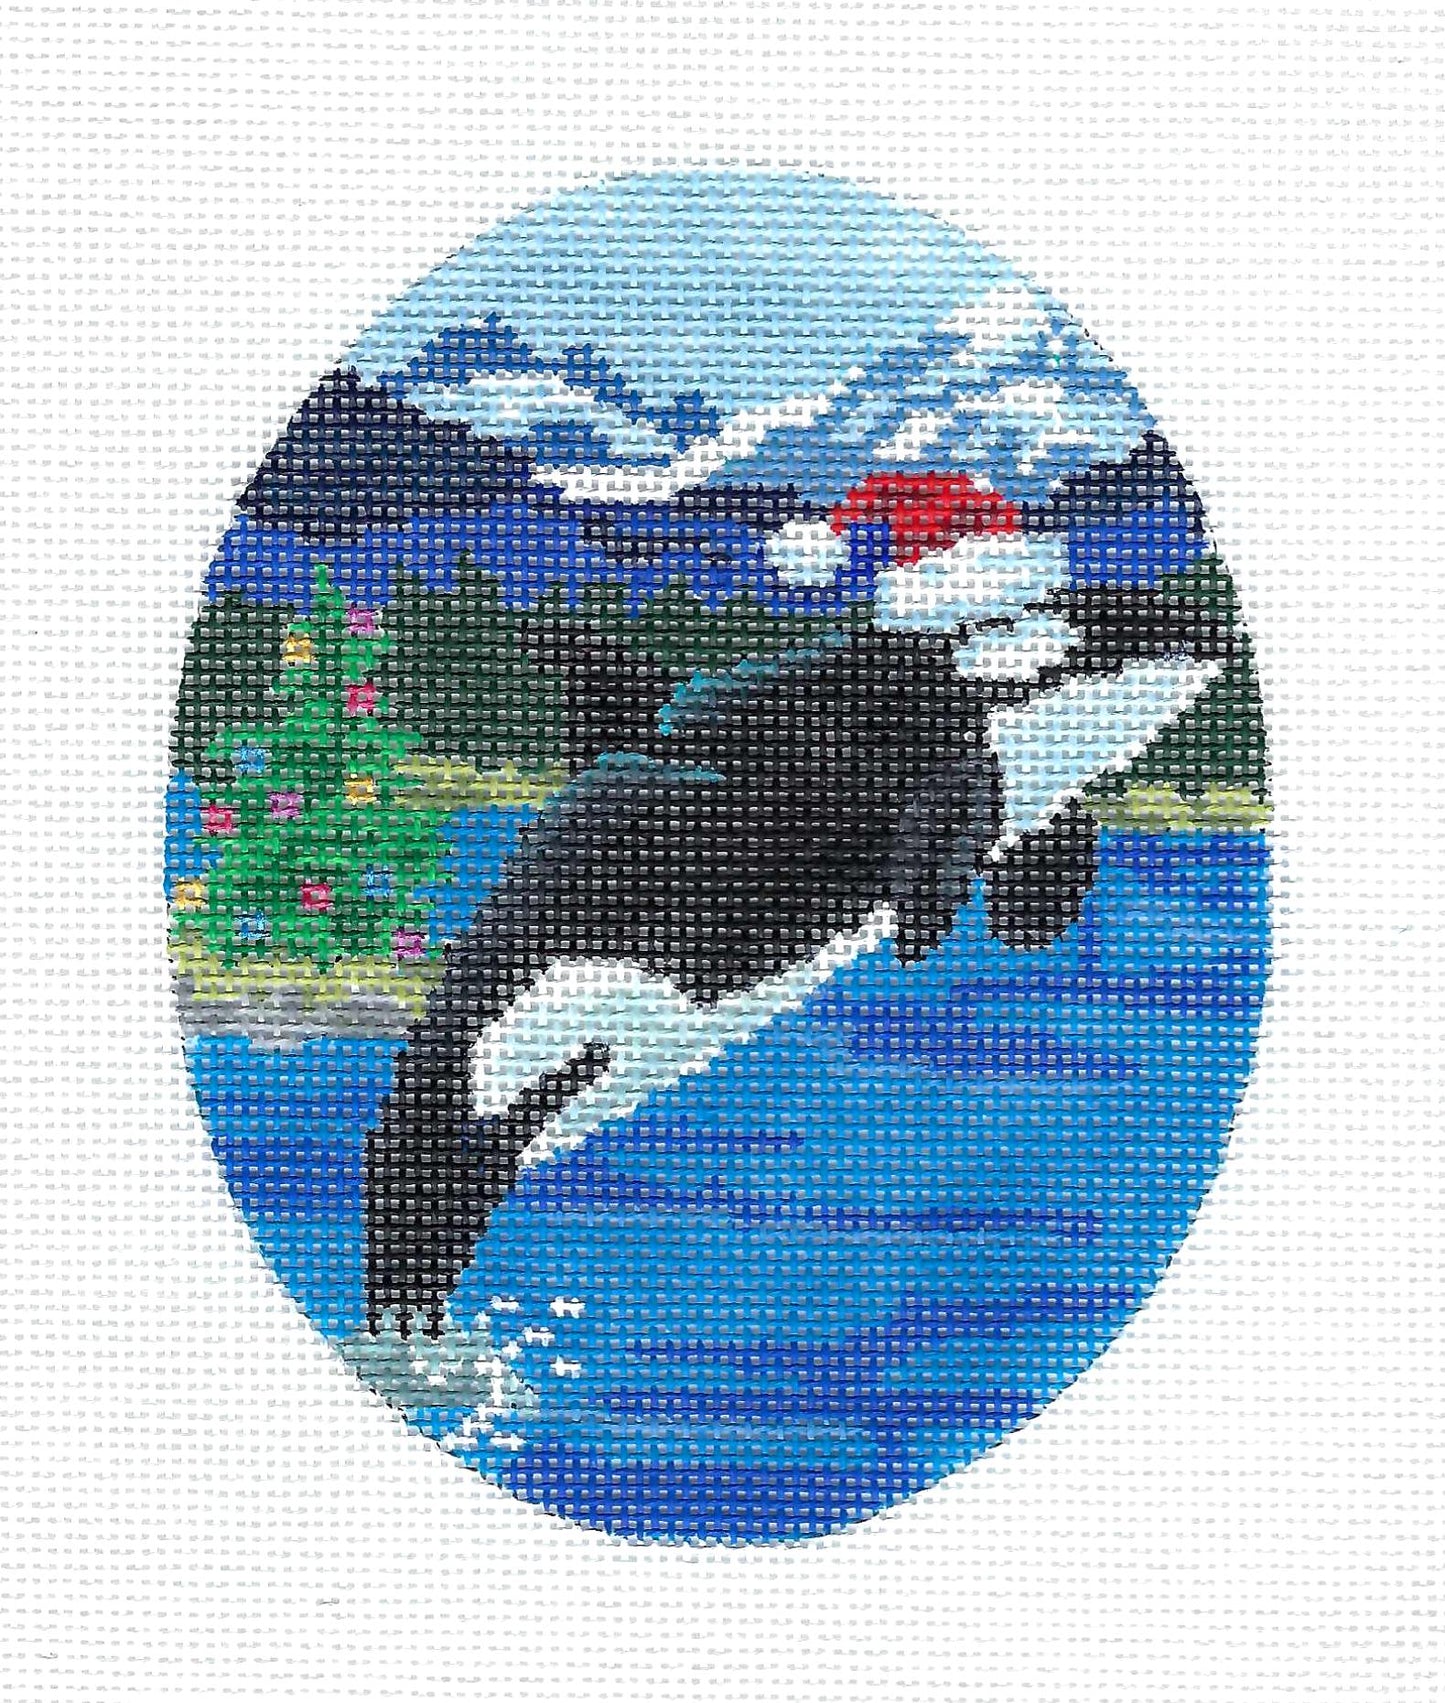 Orca Whale ~ Orca Whale in a Santa Hat Oval Handpainted  Needlepoint Canvas by Scott Church